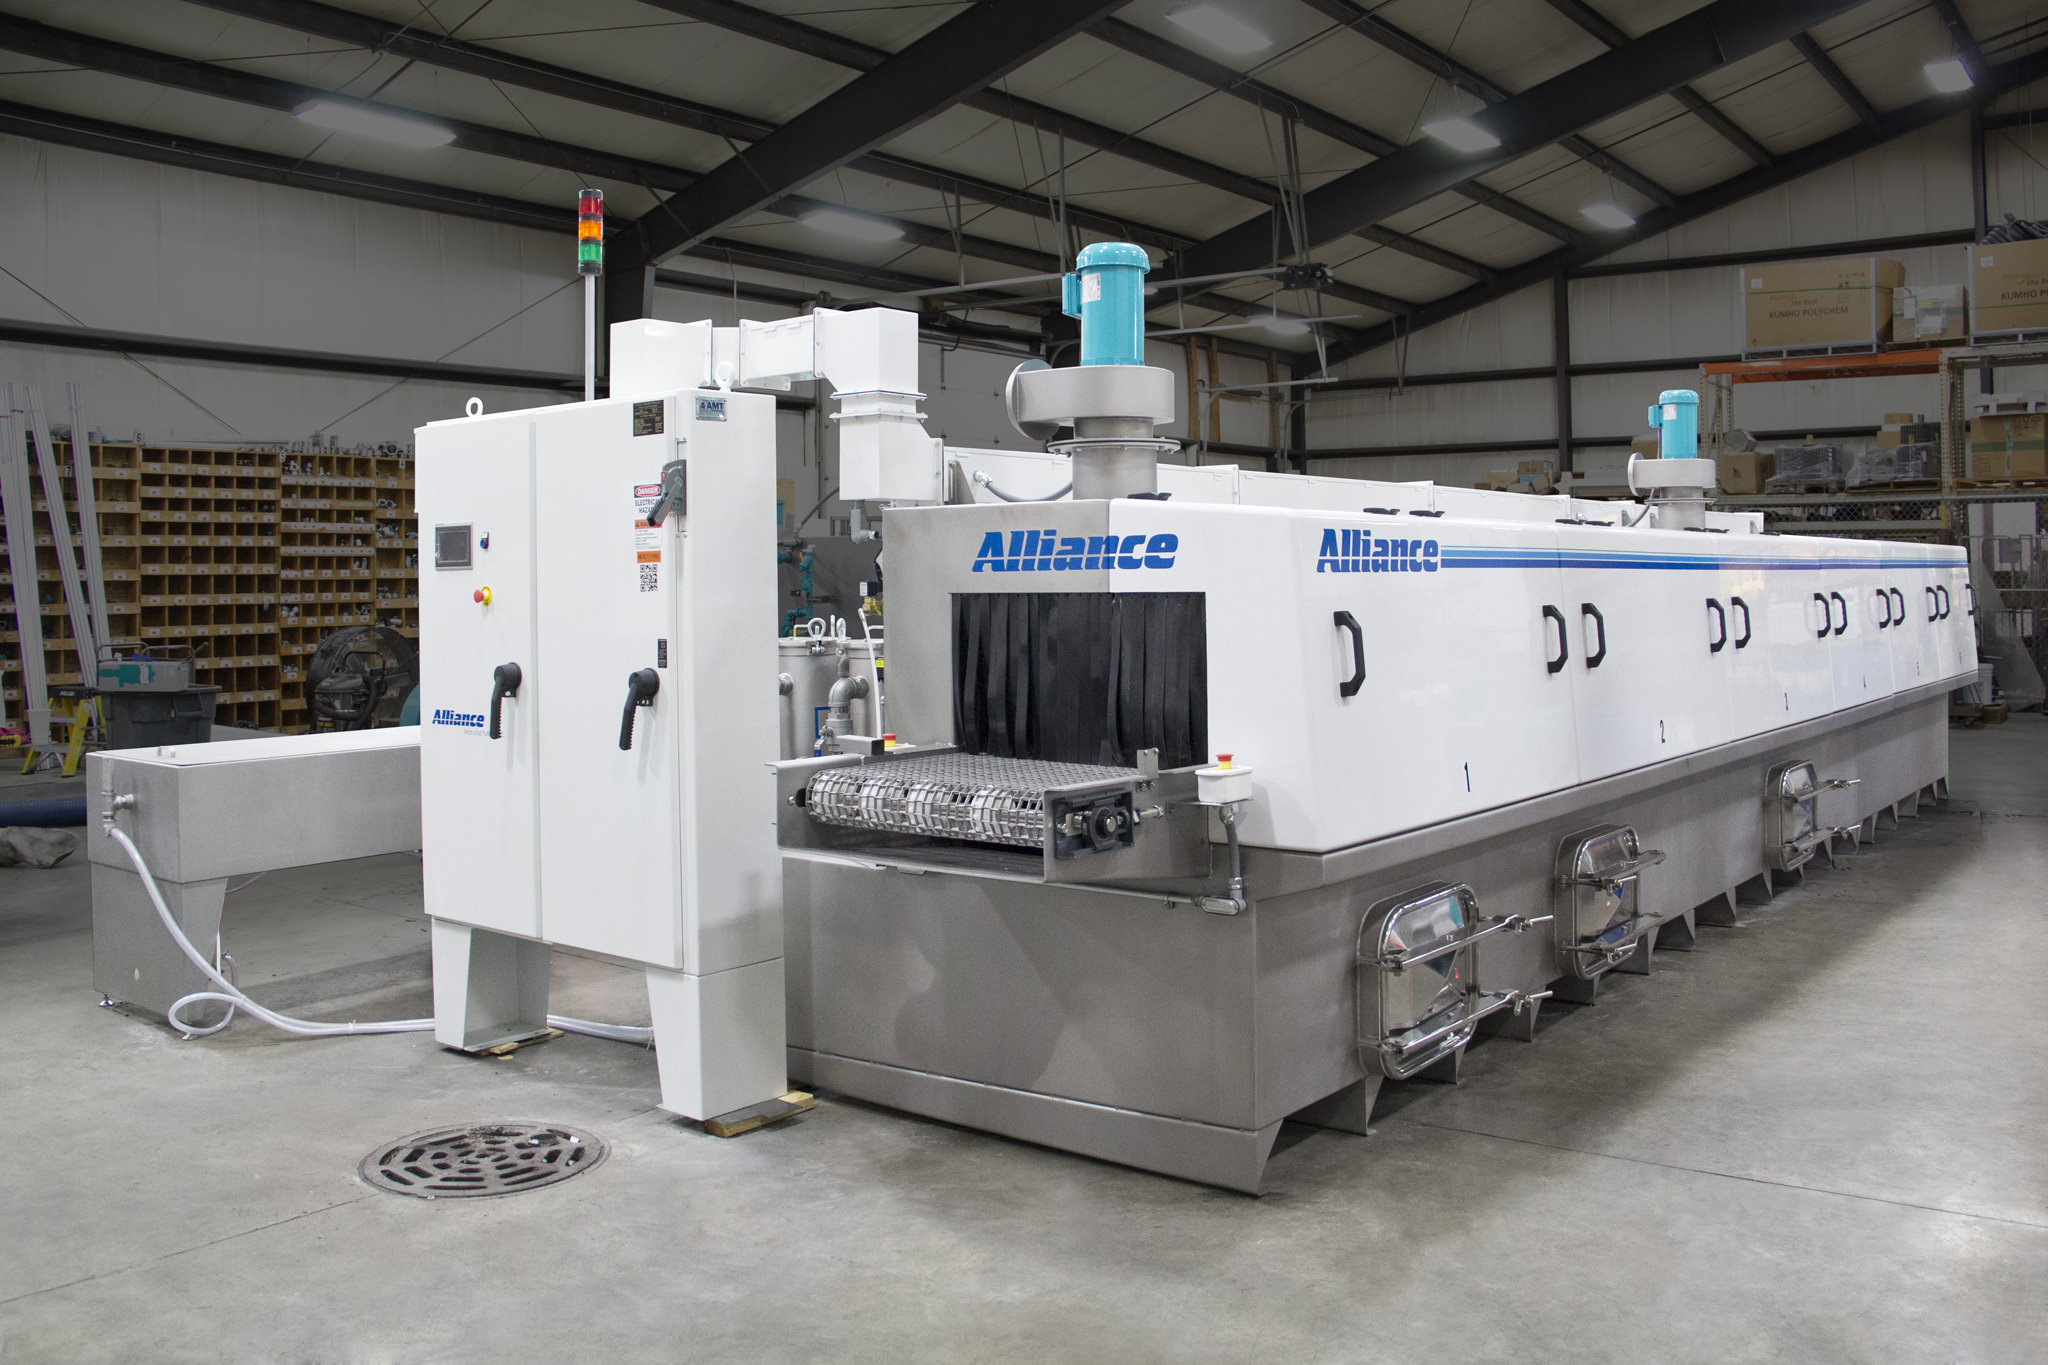 Multi-stage aqueous parts washer for cleaning aluminum, steel, and stainless steel parts 